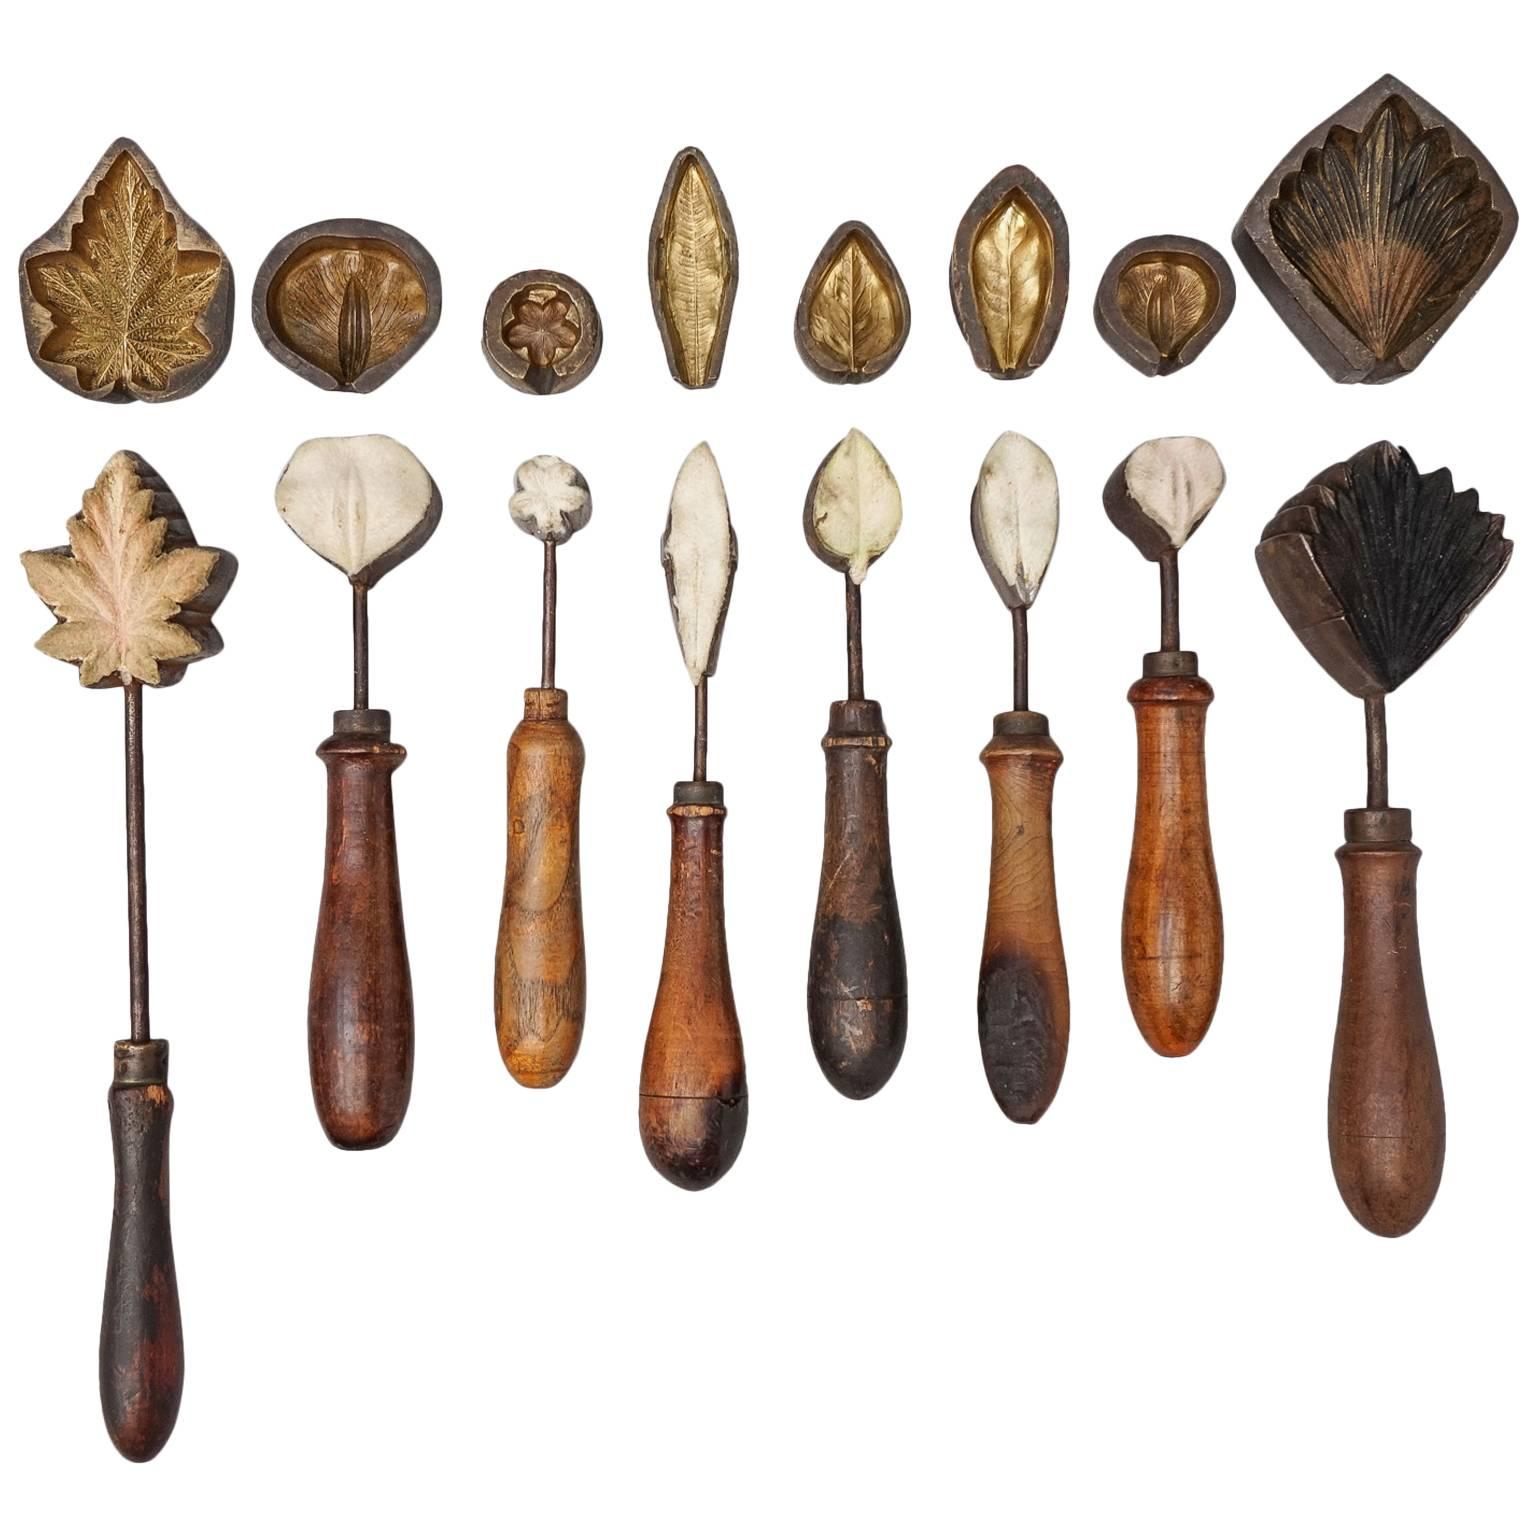 19th Century Set of Eight Corsage Flower Irons from France